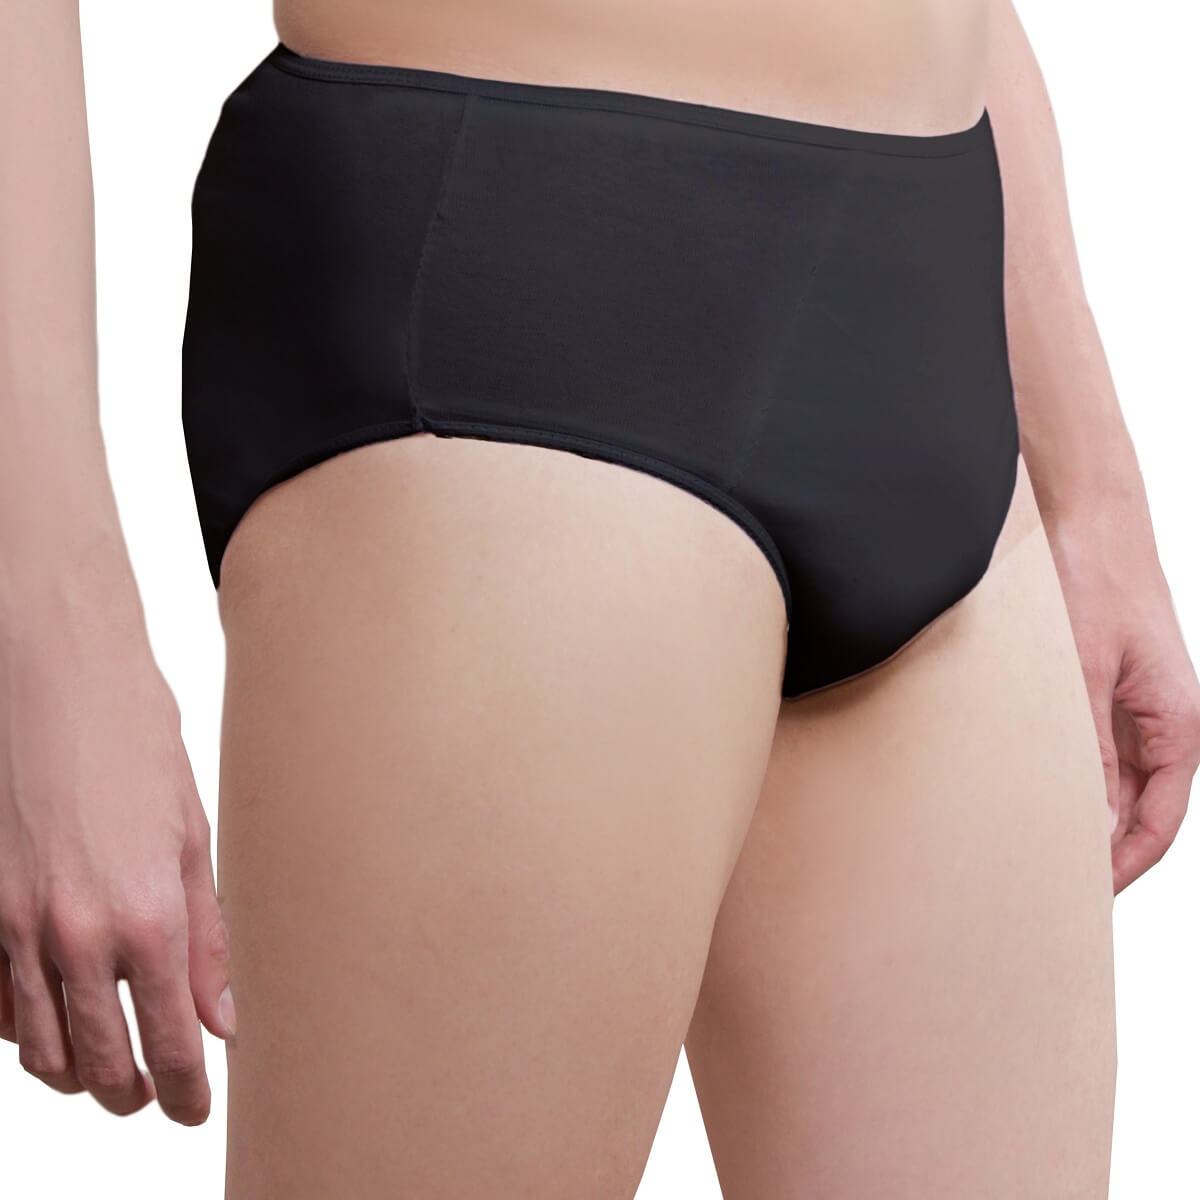 http://owtravelproducts.com/cdn/shop/products/One-Wear_Disposable_Briefs_Pants_Underpants_for_Hospital_Travel_Spa_and_Emergency_-_Cotton_Black_-_Super_Soft_Disposable_Cotton_Underwear.jpg?v=1652458664